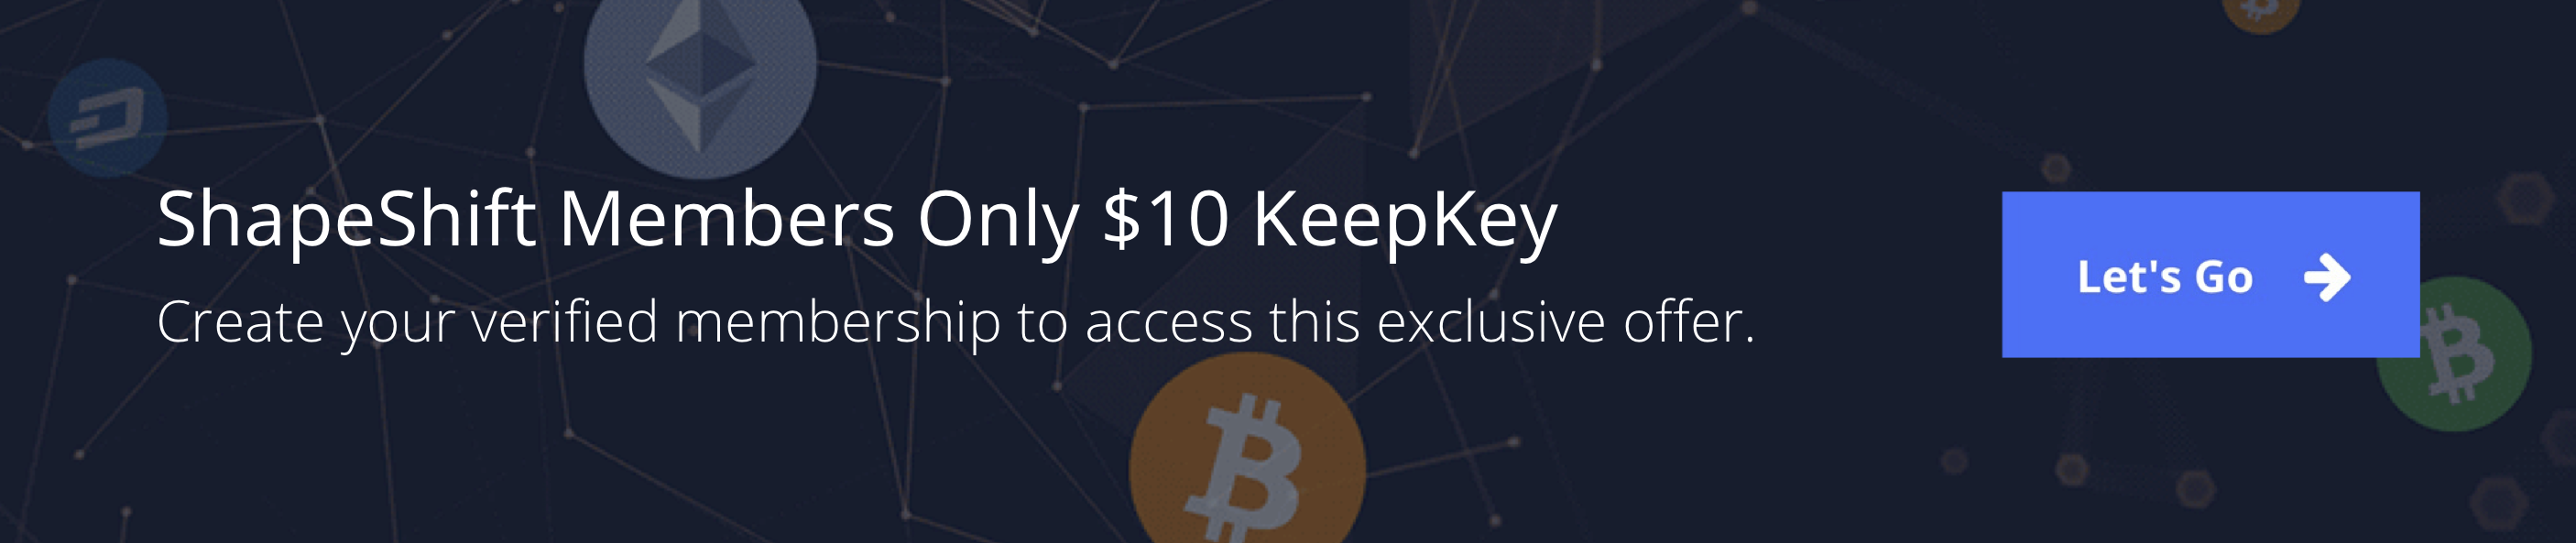 ShapeShift Members Only: Sign up to receive a KeepKey hardware wallet for only $10.